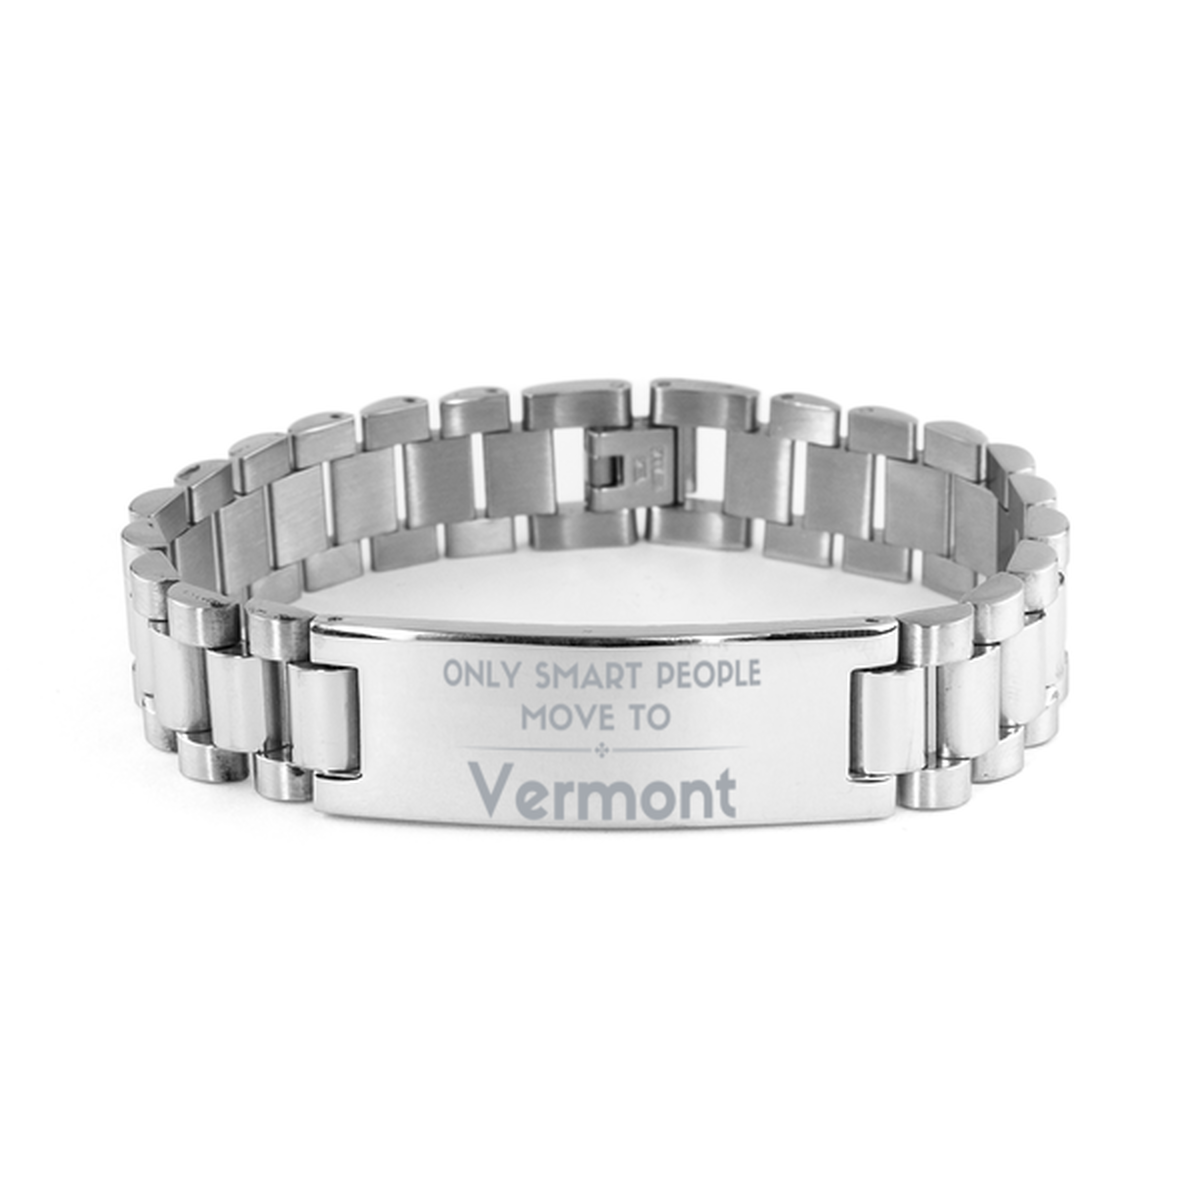 Only smart people move to Vermont Ladder Stainless Steel Bracelet, Gag Gifts For Vermont, Move to Vermont Gifts for Friends Coworker Funny Saying Quote